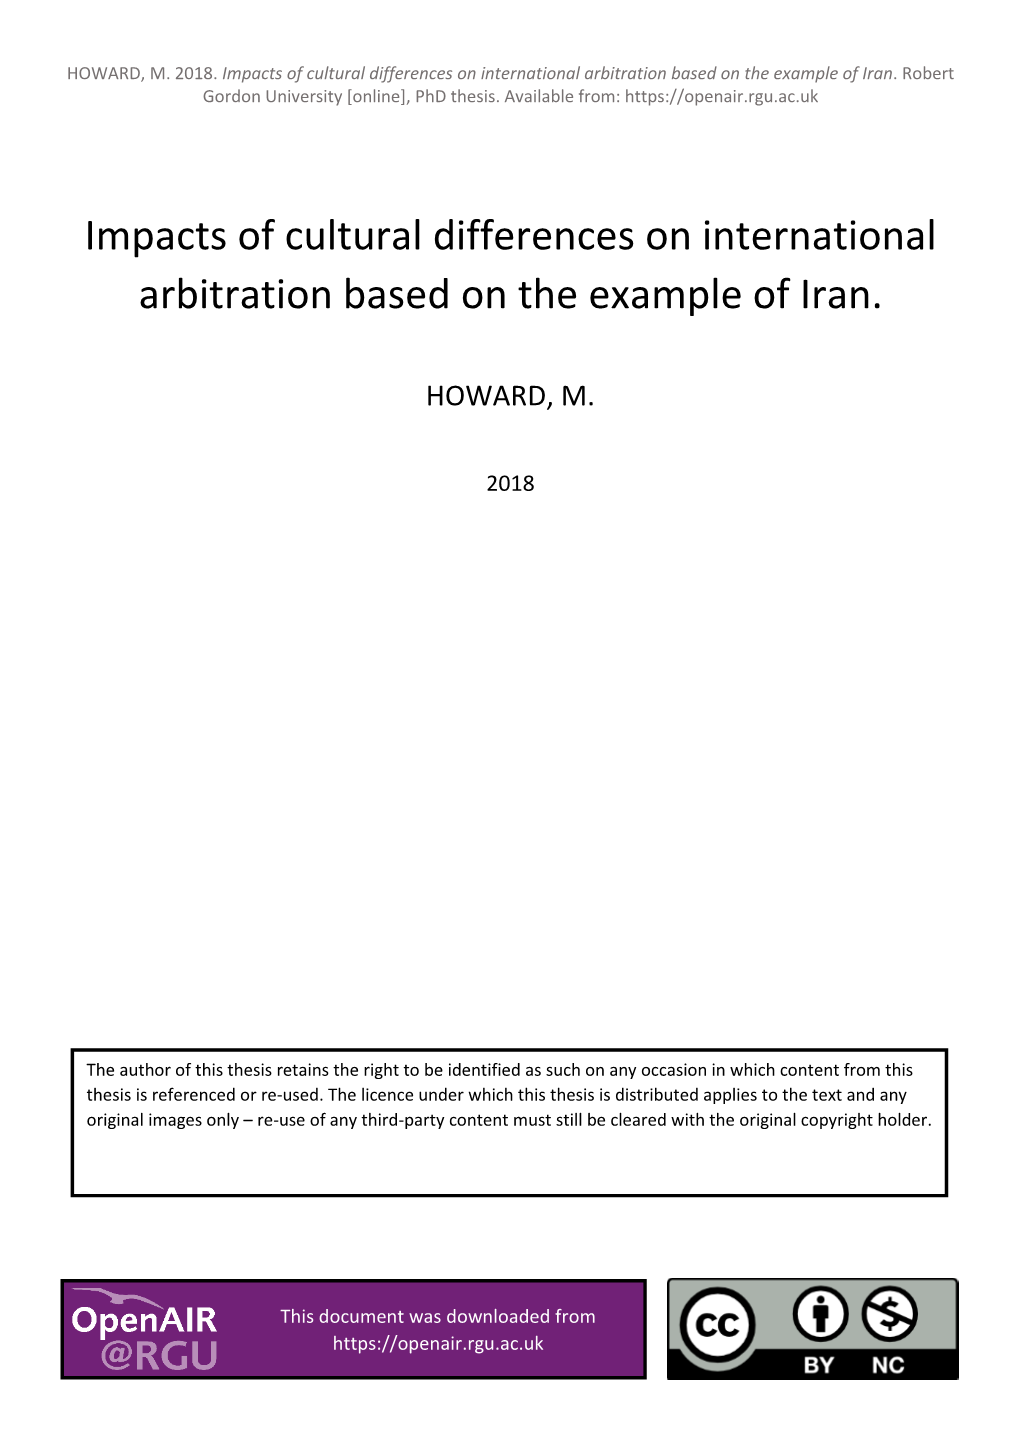 Impacts of Cultural Differences on International Arbitration Based on the Example of Iran